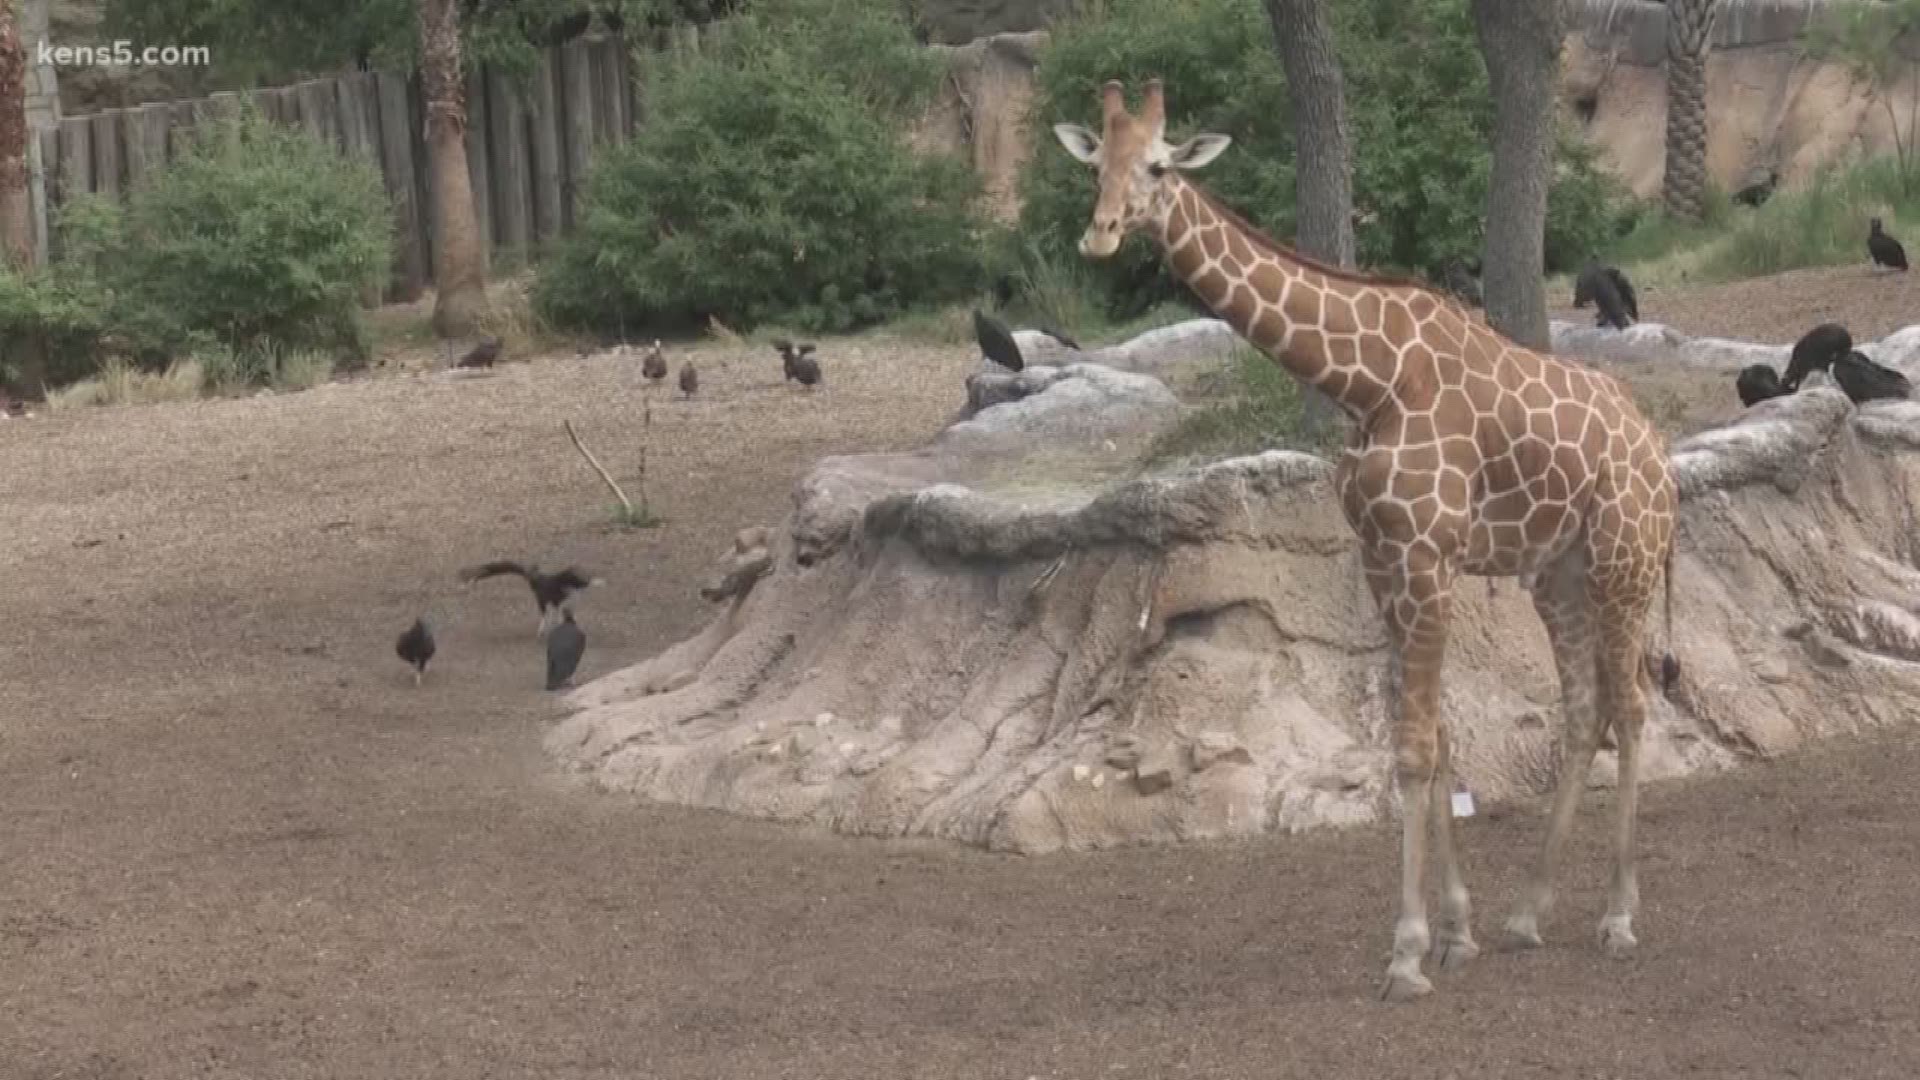 While Toys R Us is going out of business, the San Antonio Zoo wants to save the mascot to use for a giraffe conservation campaign.